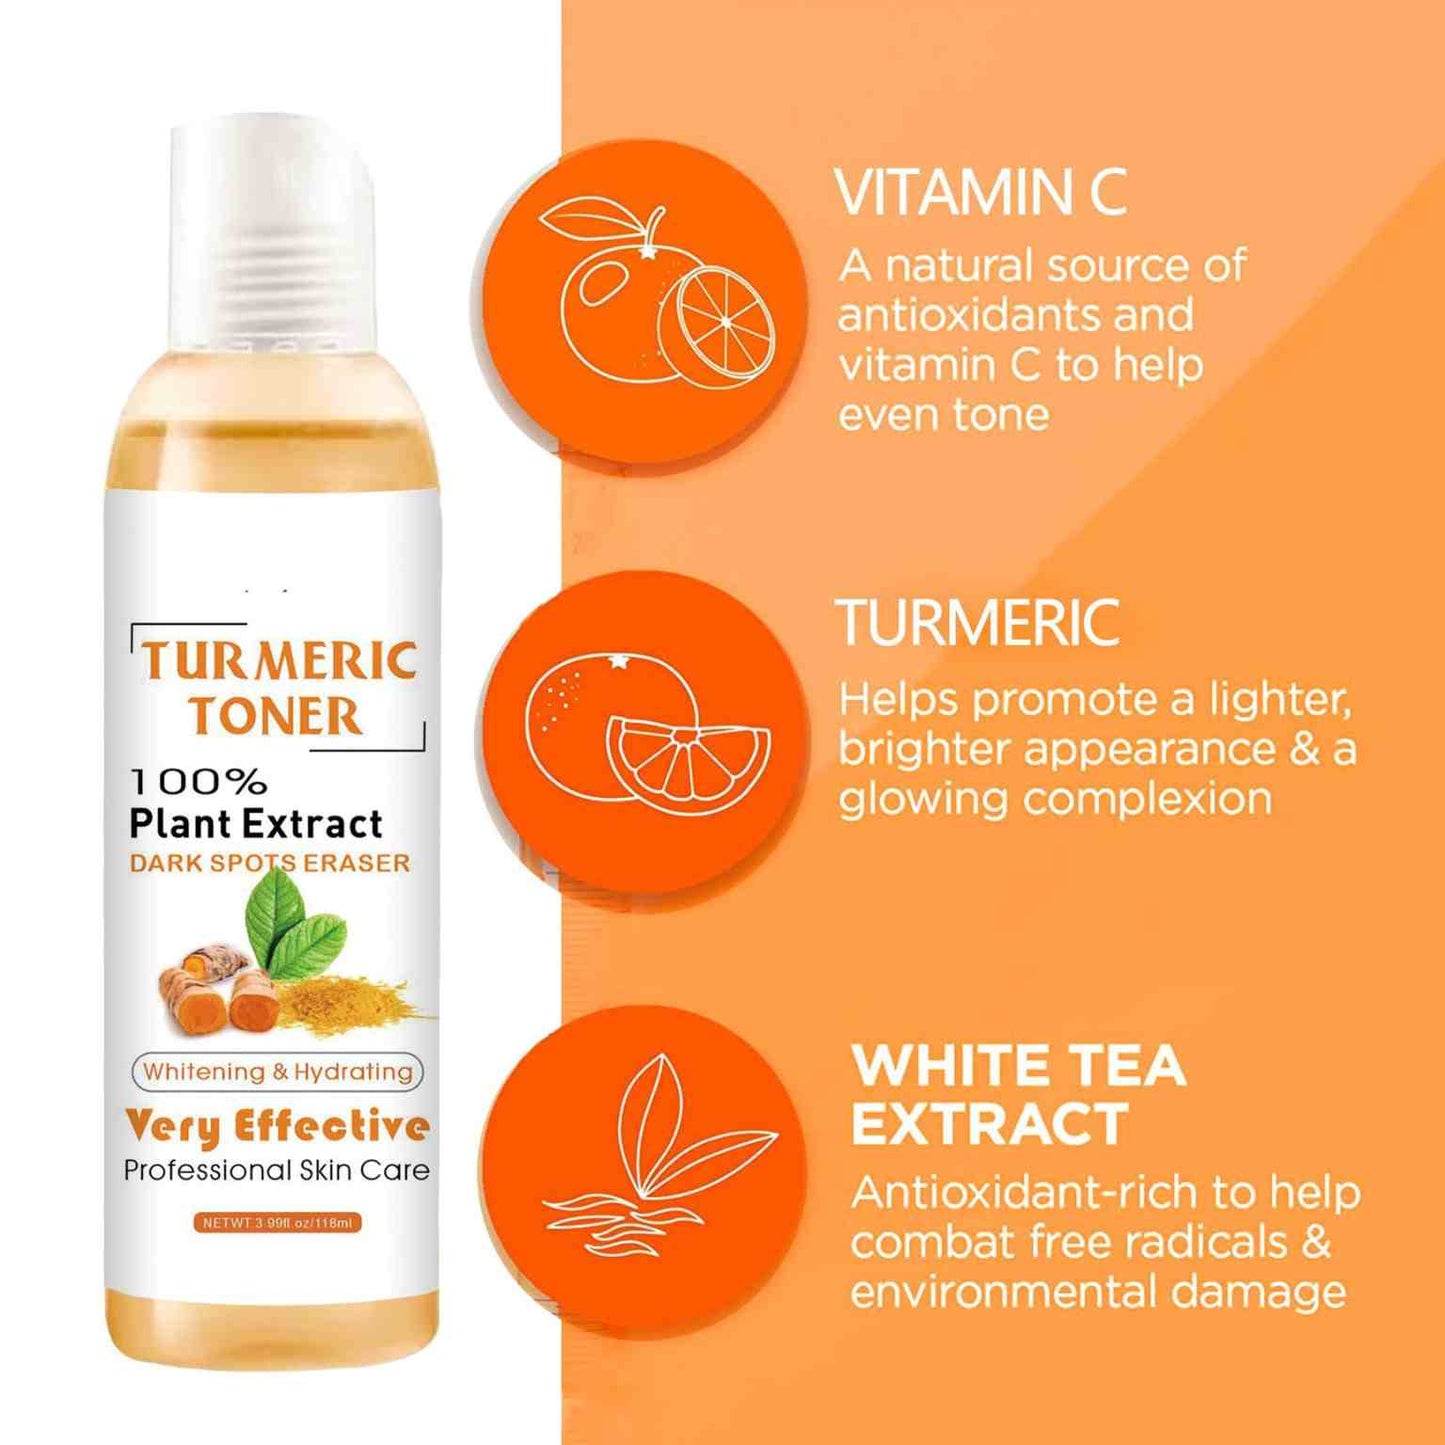 Turmeric Toning Lotion for Skin Whitening, Hydrating and Dark Spots Eraser - A.A.Y FASHION